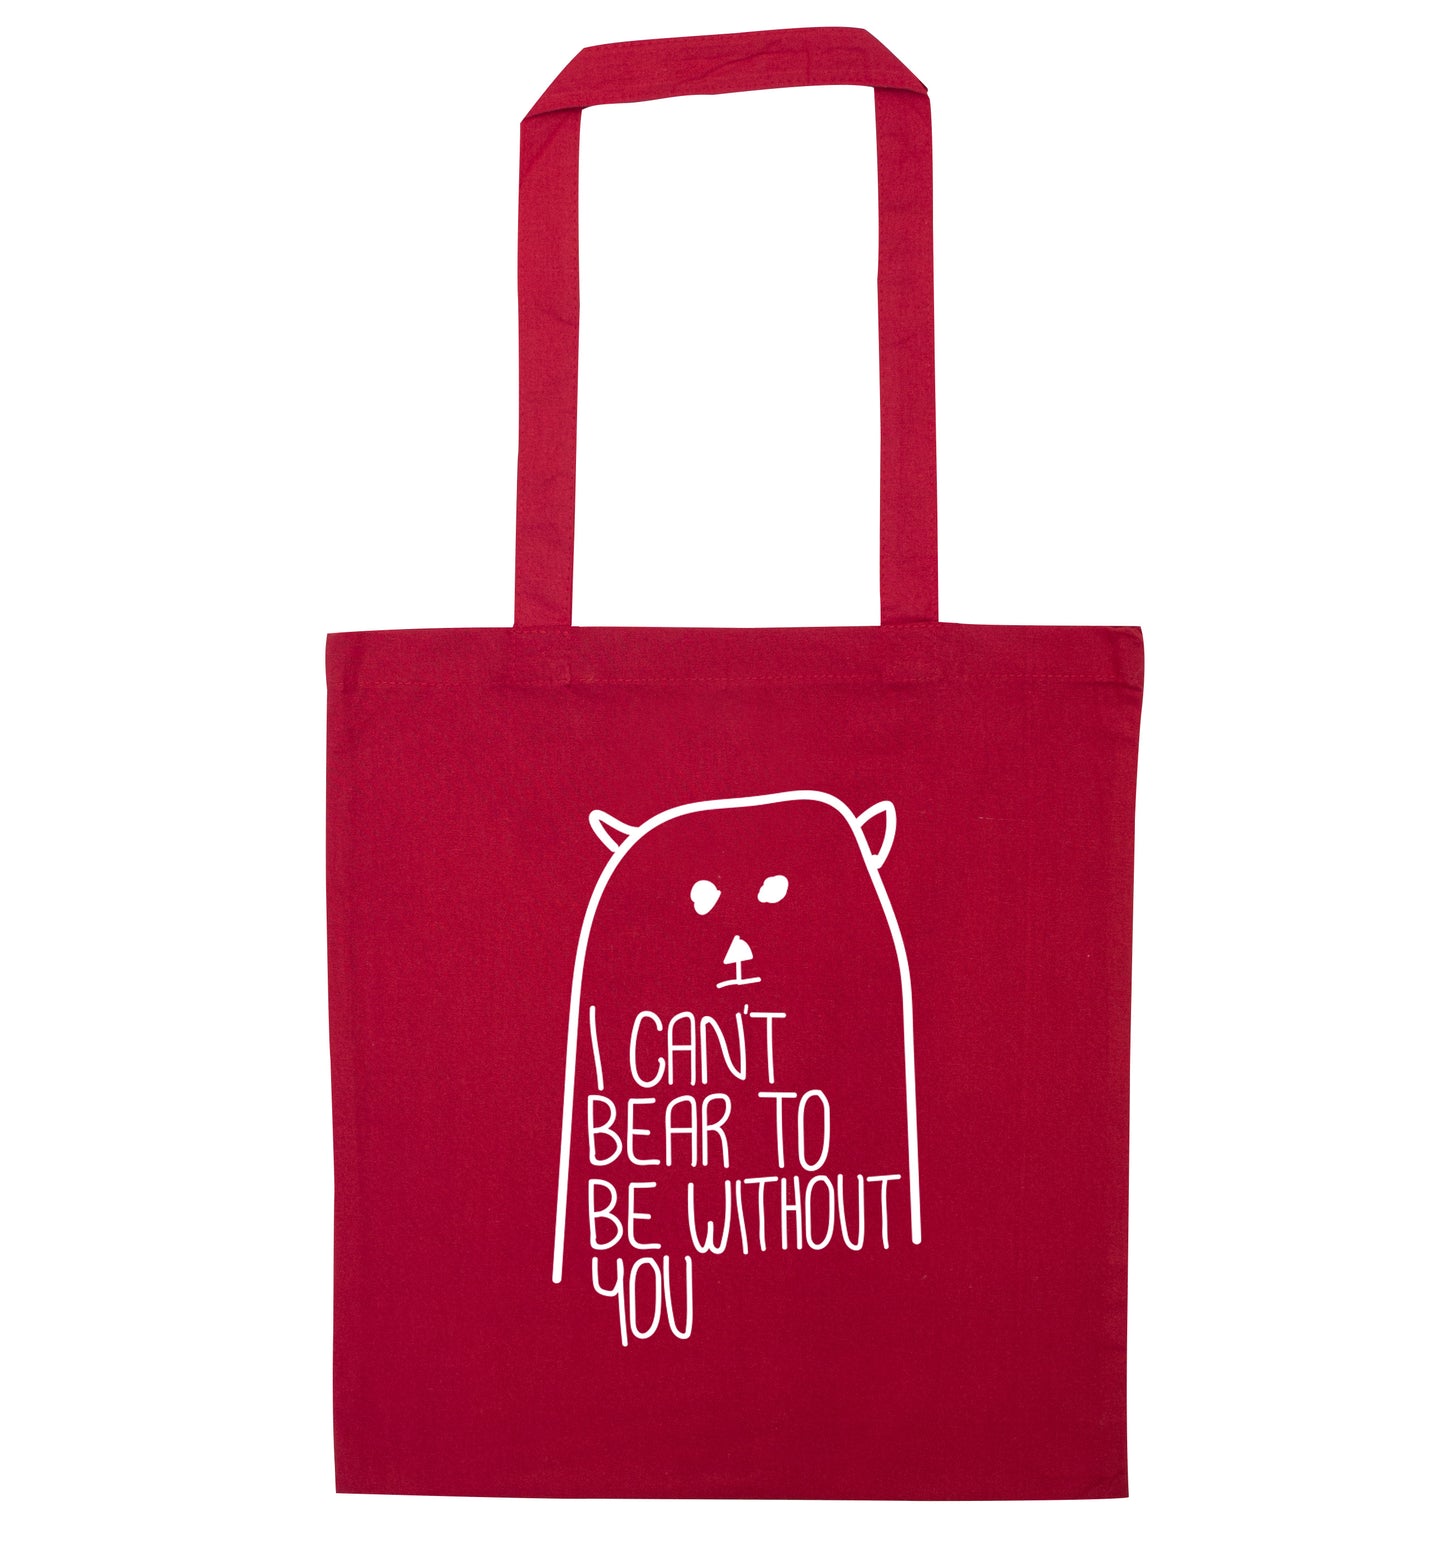 I can't bear to be without you red tote bag